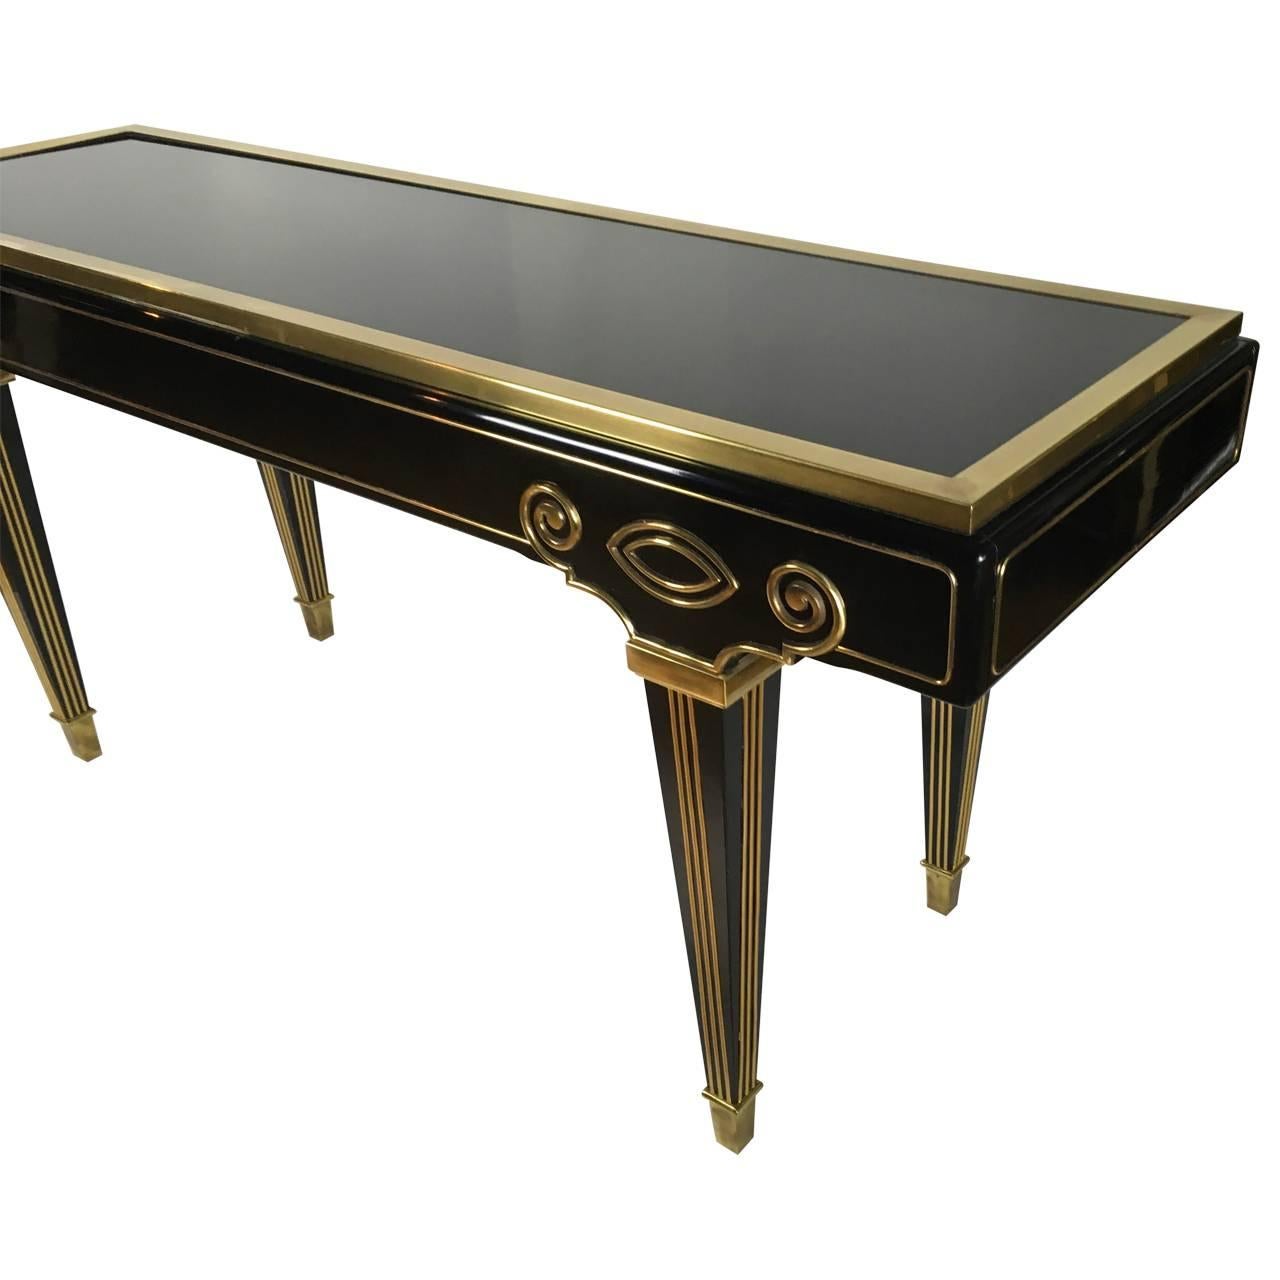 Black lacquered console table with unique brass details by Mastercraft USA, circa 1980s rare design, exceptional table with original finish.